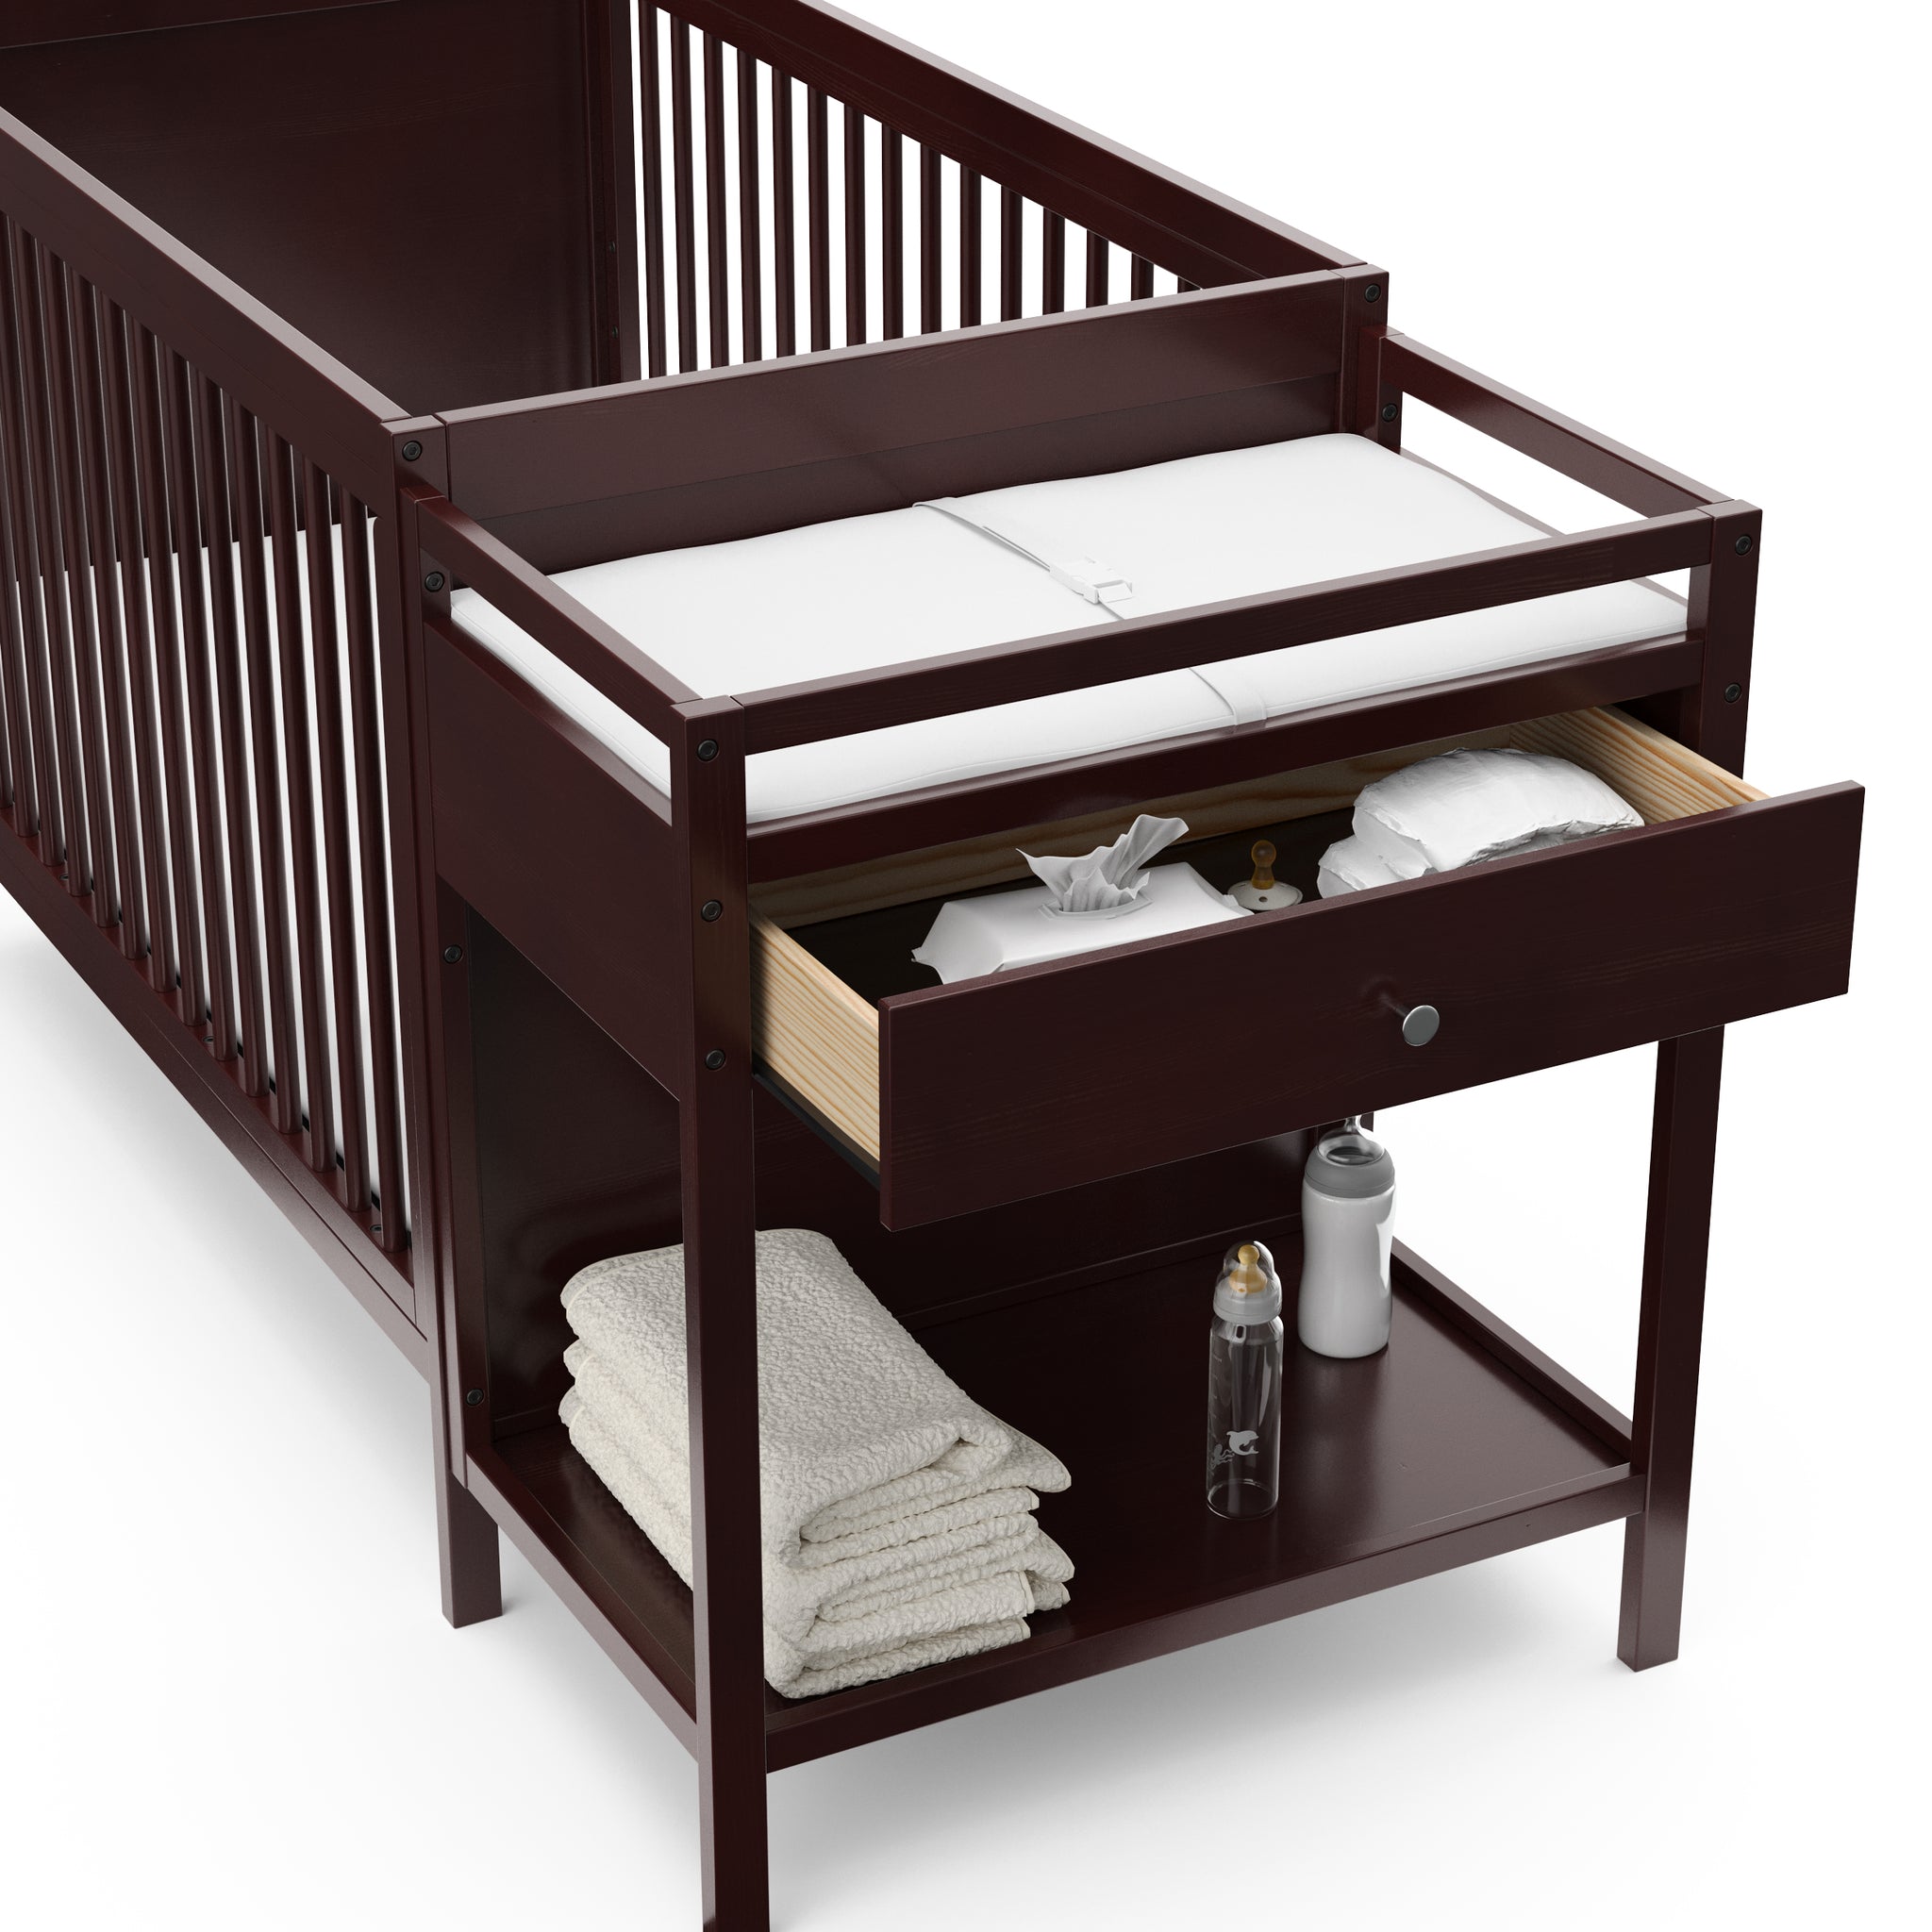 Close-up view of espresso crib and changer with open drawer